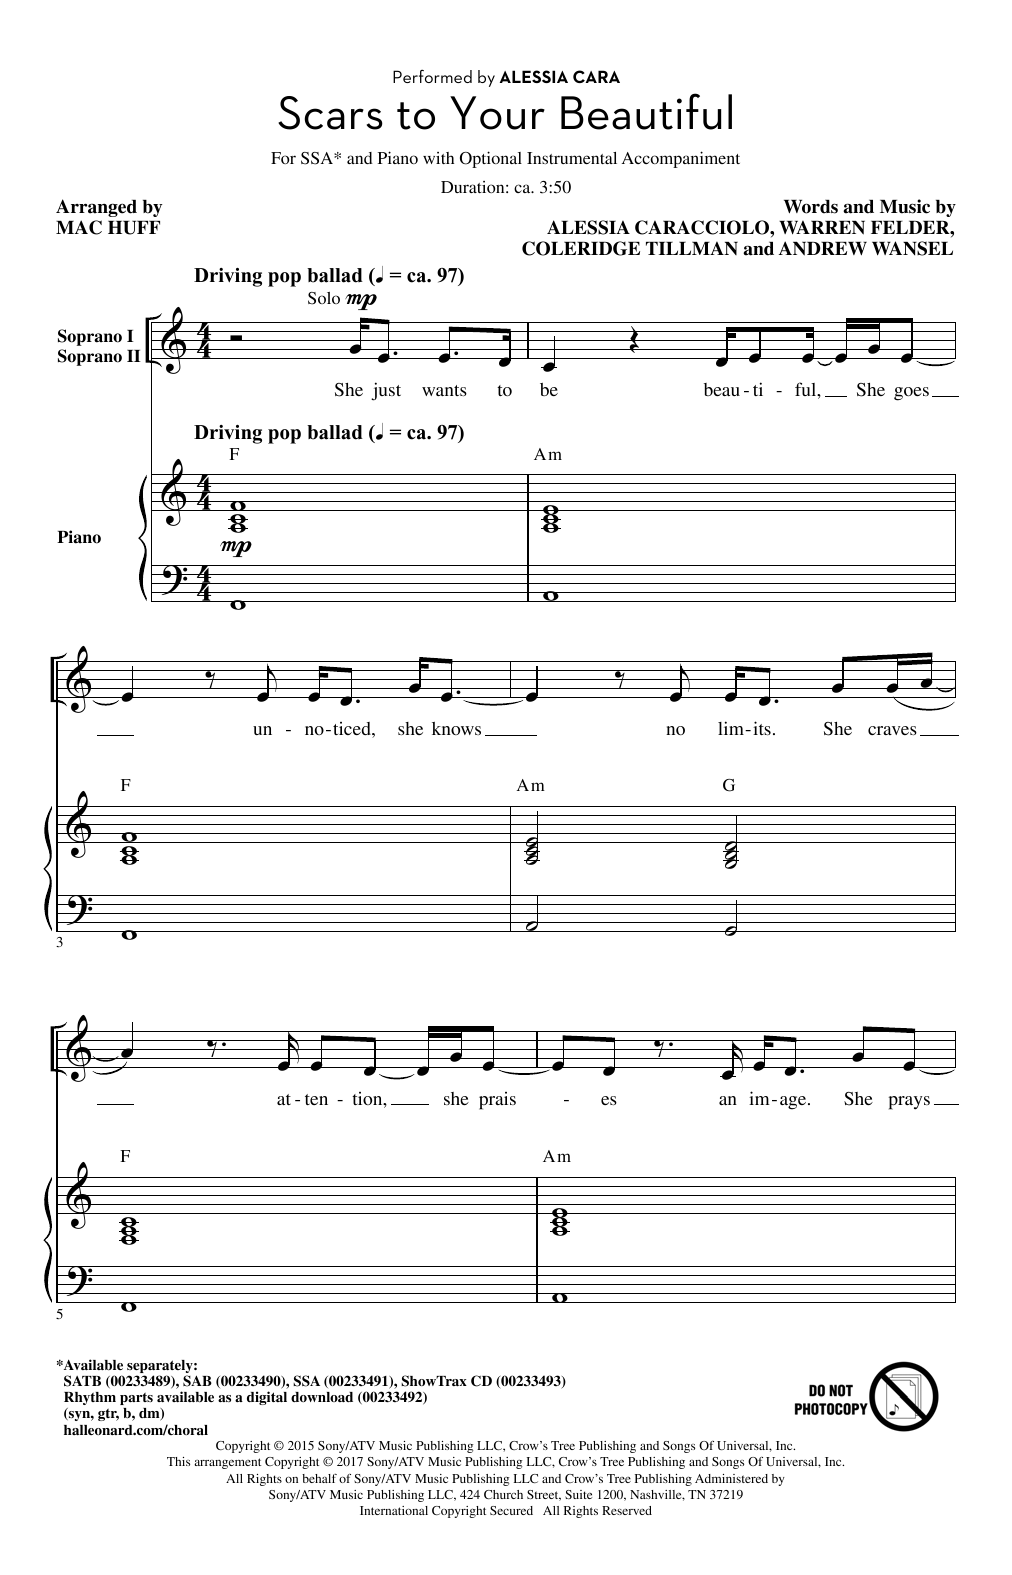 Download Alessia Cara Scars To Your Beautiful (arr. Mac Huff) Sheet Music